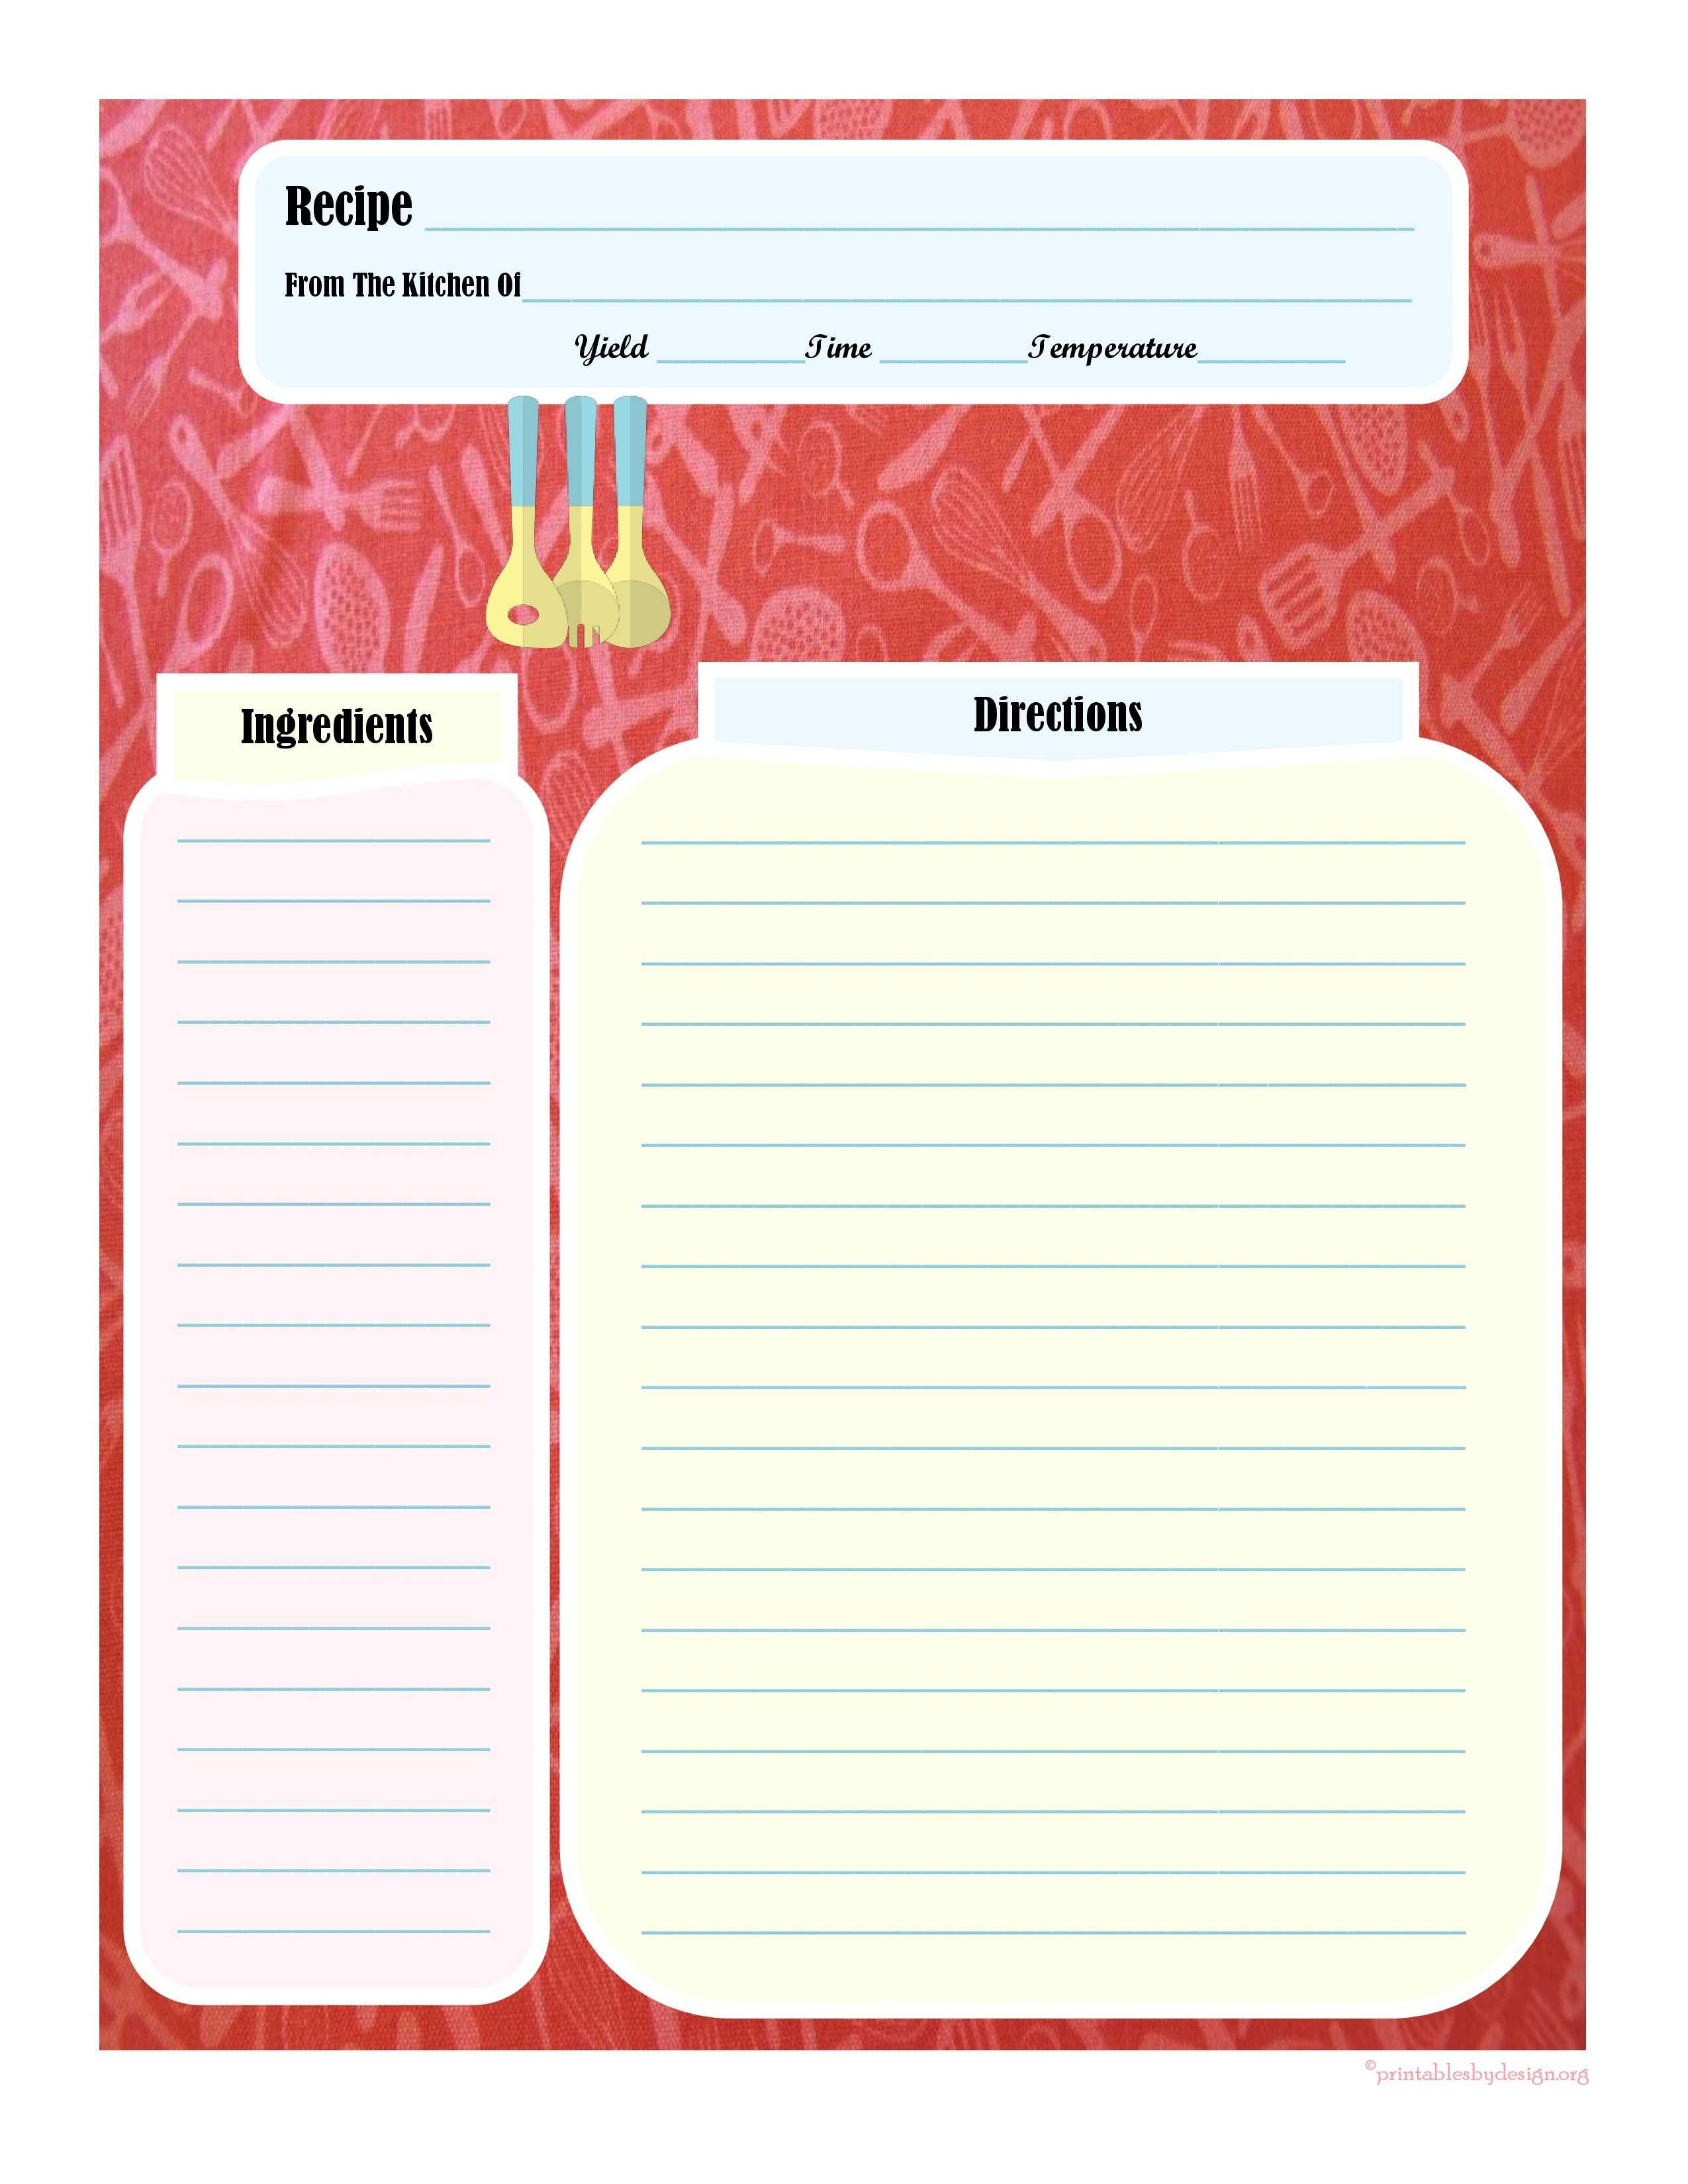 Full Page Recipe Card | Printable Recipe Cards, Family With Regard To Recipe Card Design Template